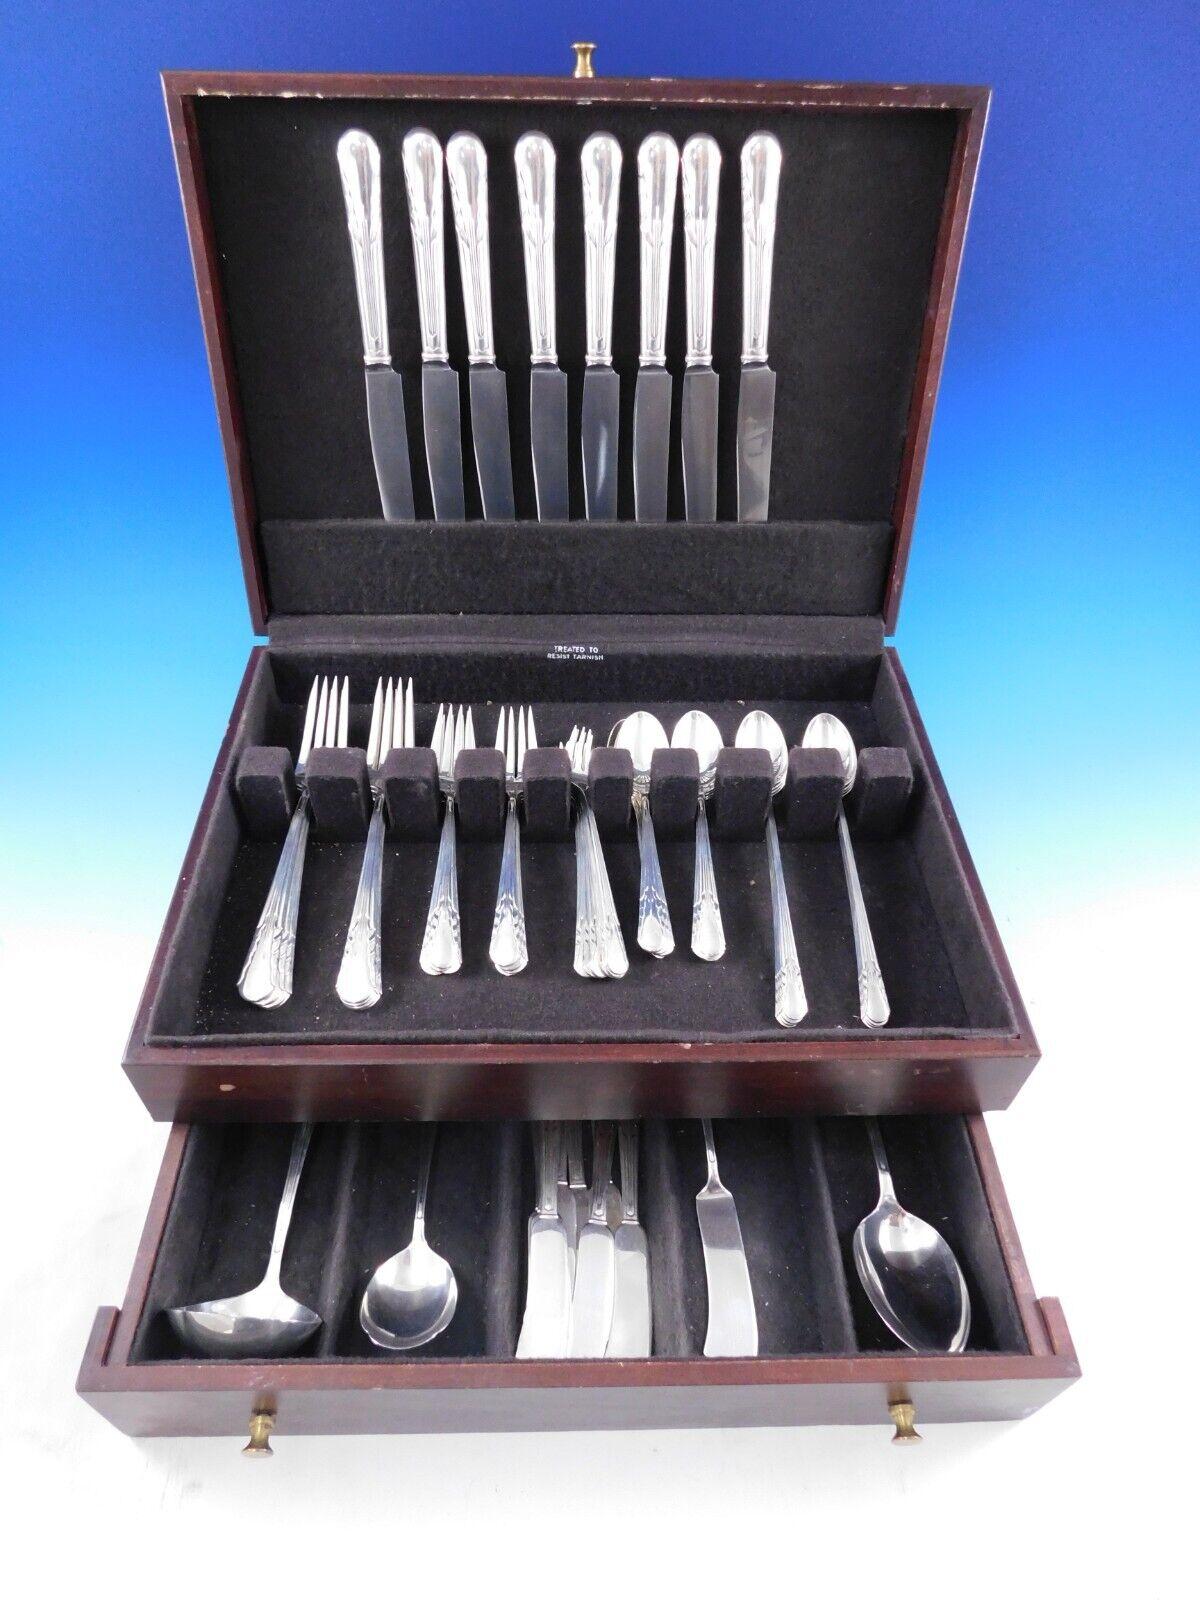 Dinner Size Orchid by International sterling silver flatware set, 68 pieces. This set includes:

8 Dinner Size Knives, 9 1/2